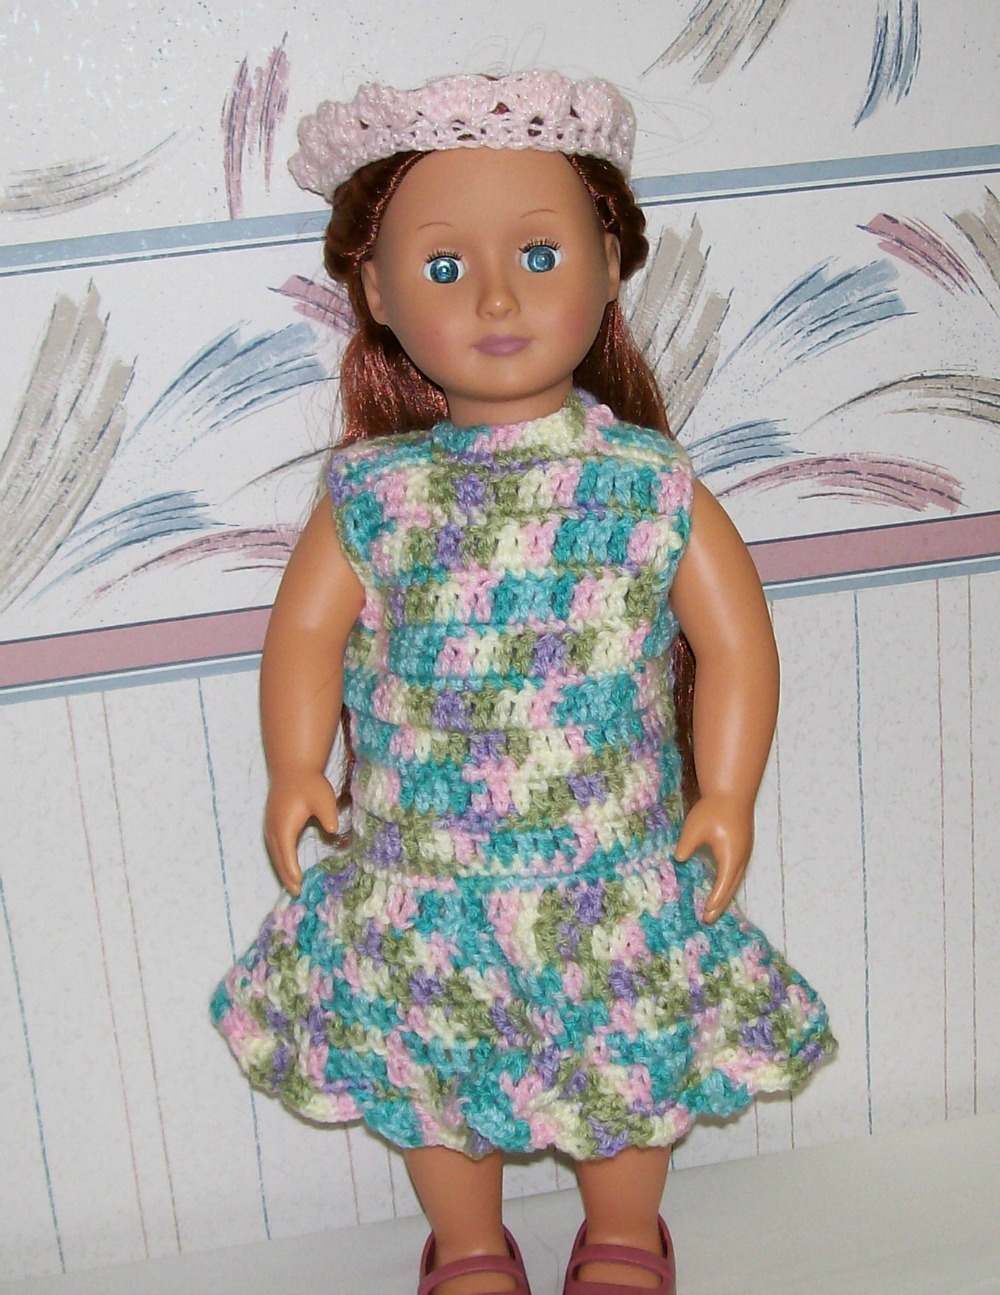 Primary image for American Girl Crocheted Dress and Headband, 18 Inch Doll, Handmade 